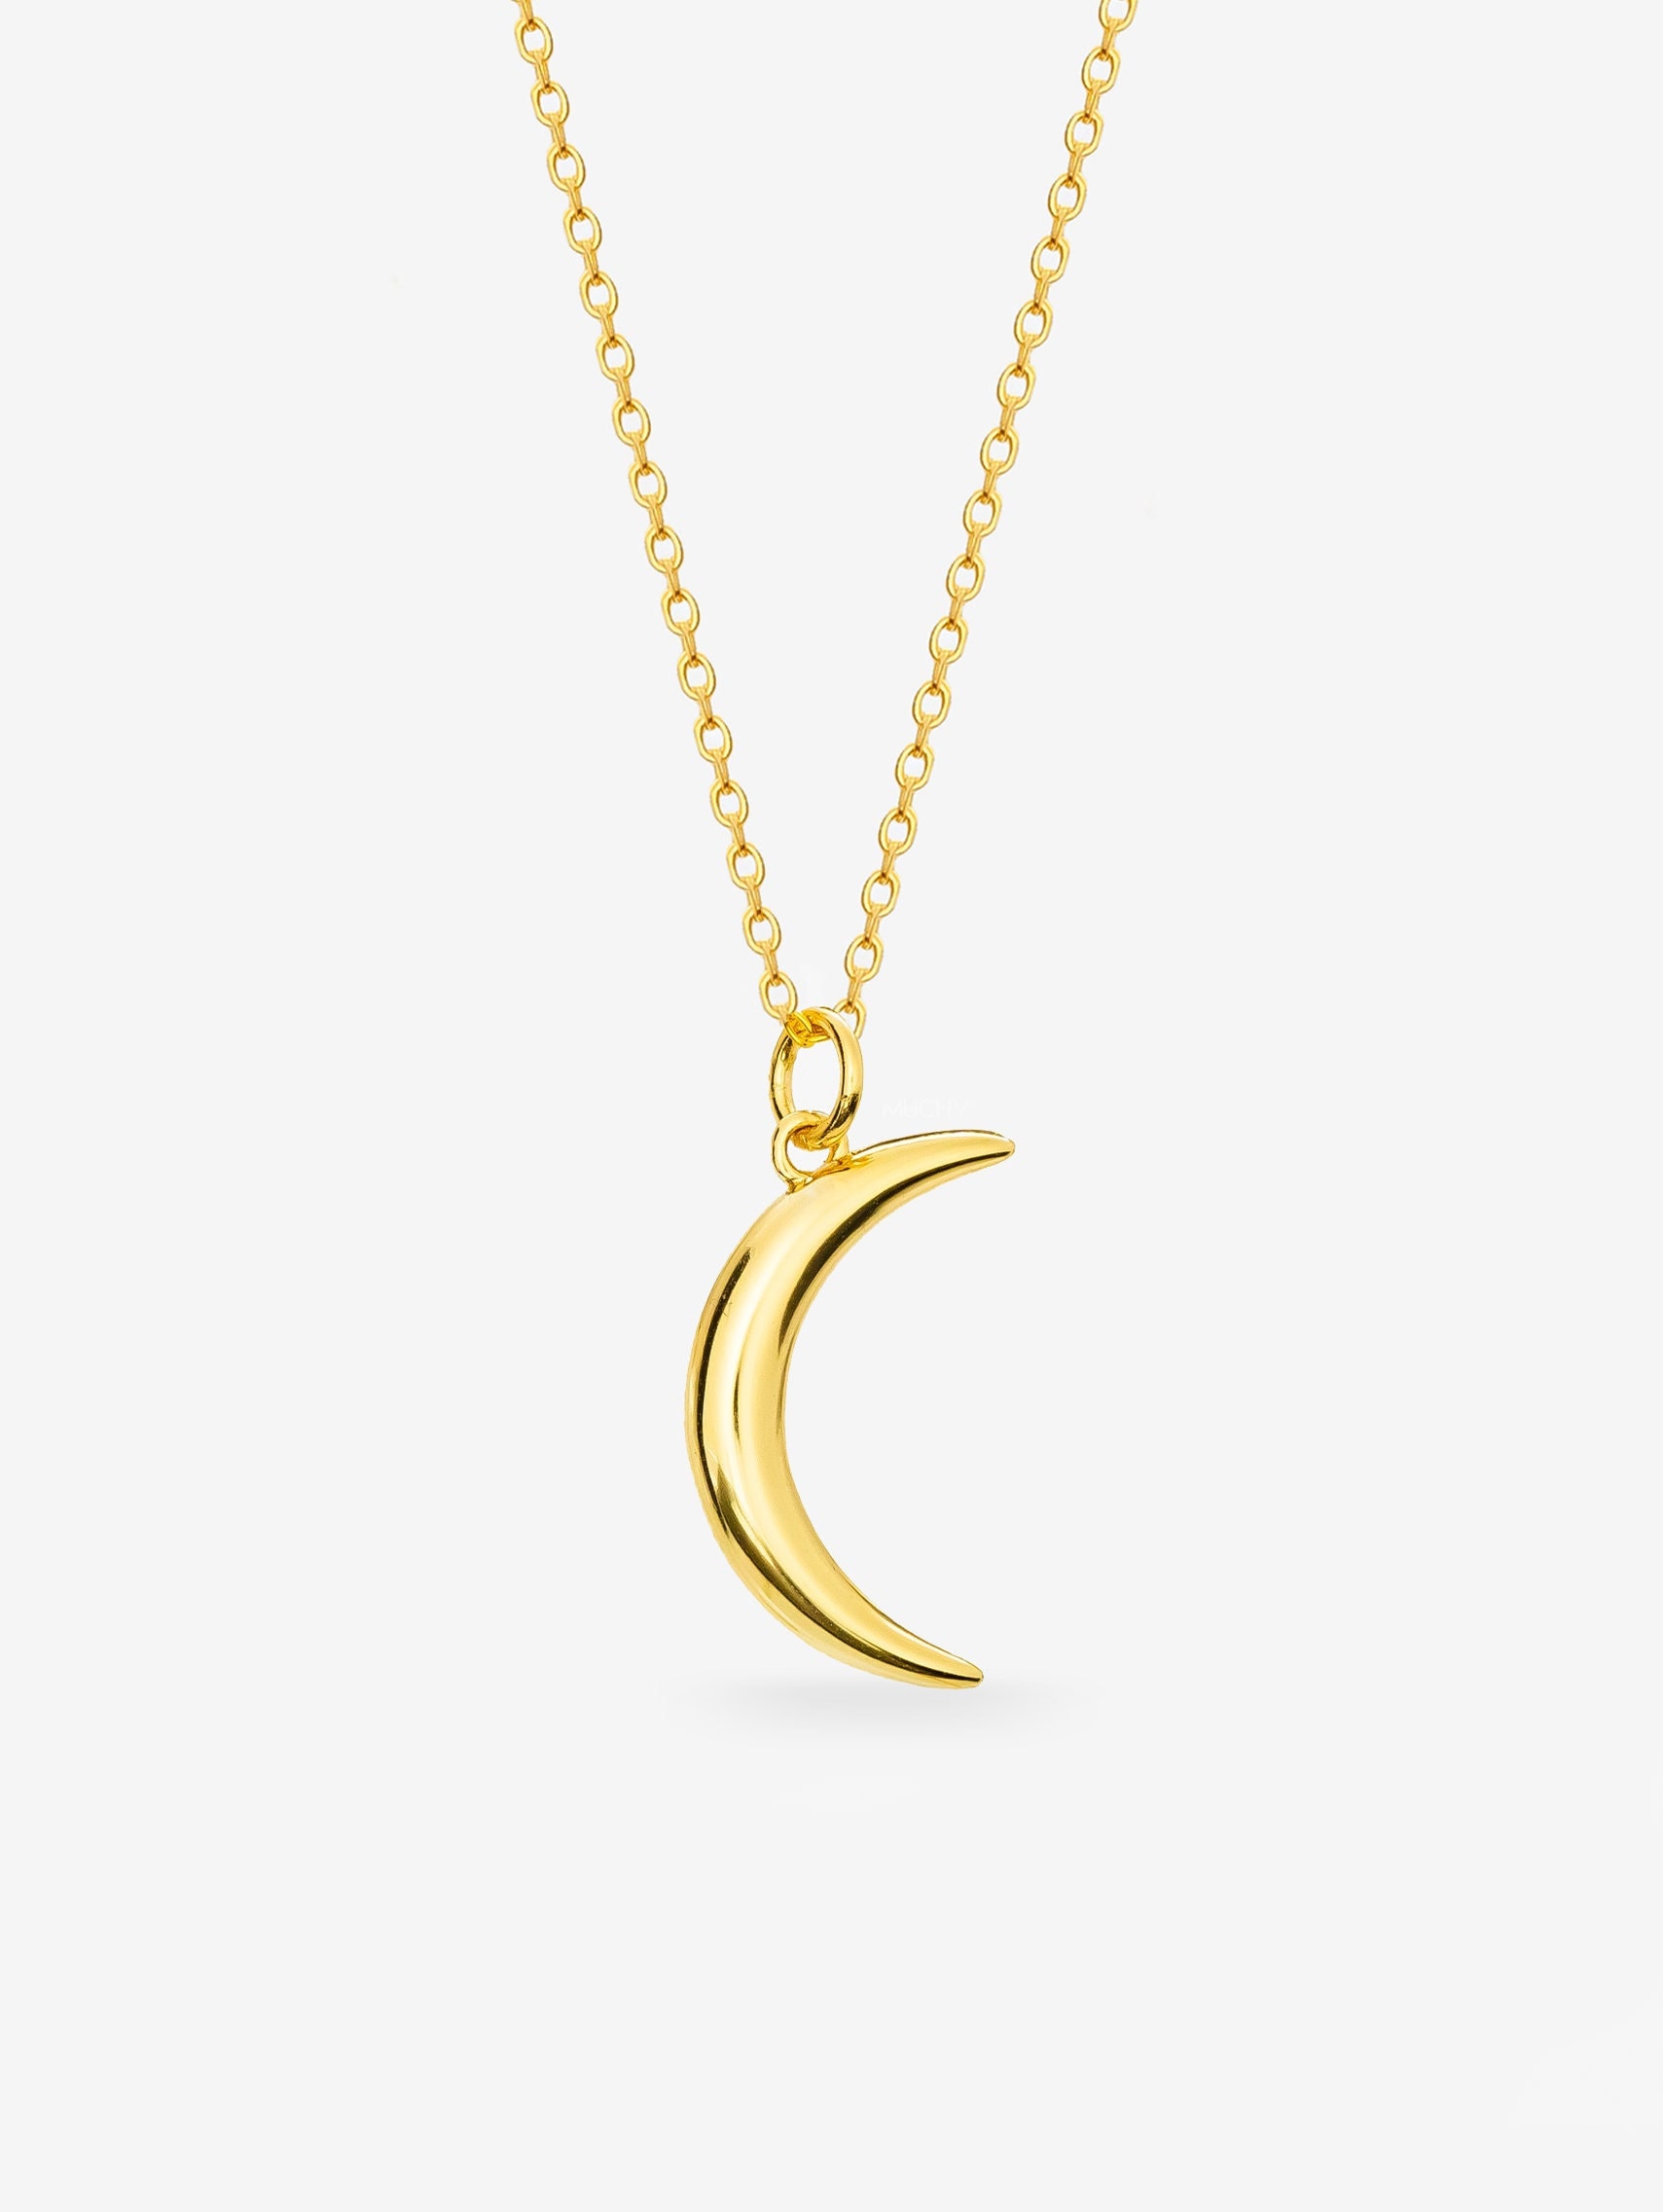 Gold Crescent Moon Necklace - Handmade Jewelry - Admiral Row